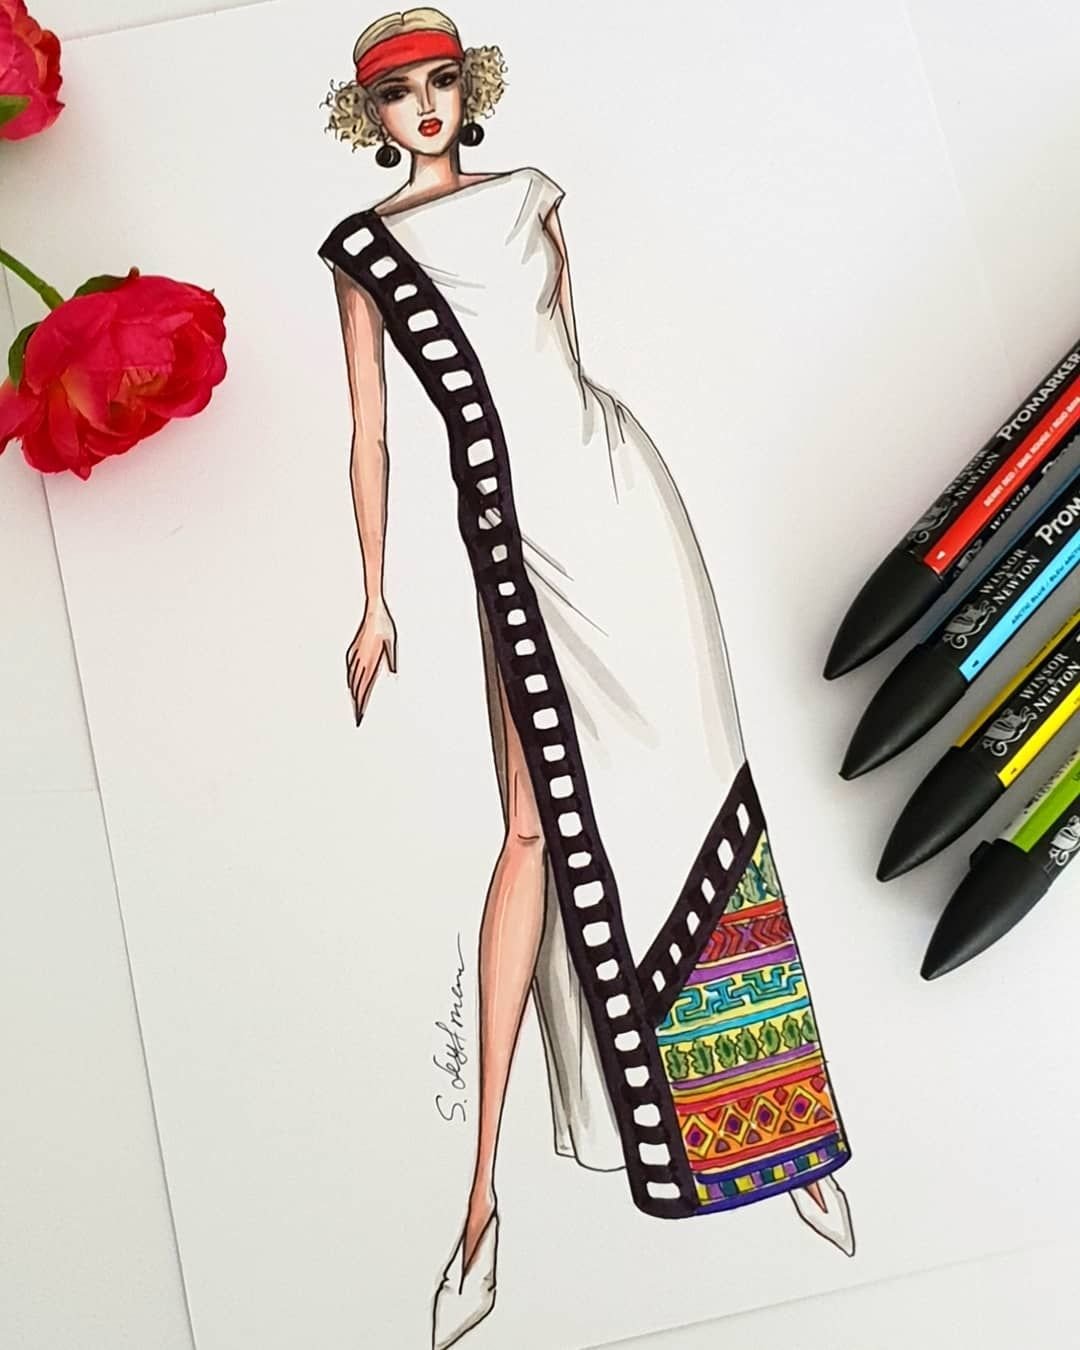 5 reasons to make fashion illustration your healing hobby  Stress  Relief Drawing and coloring can help reduce stress levels and  Instagram